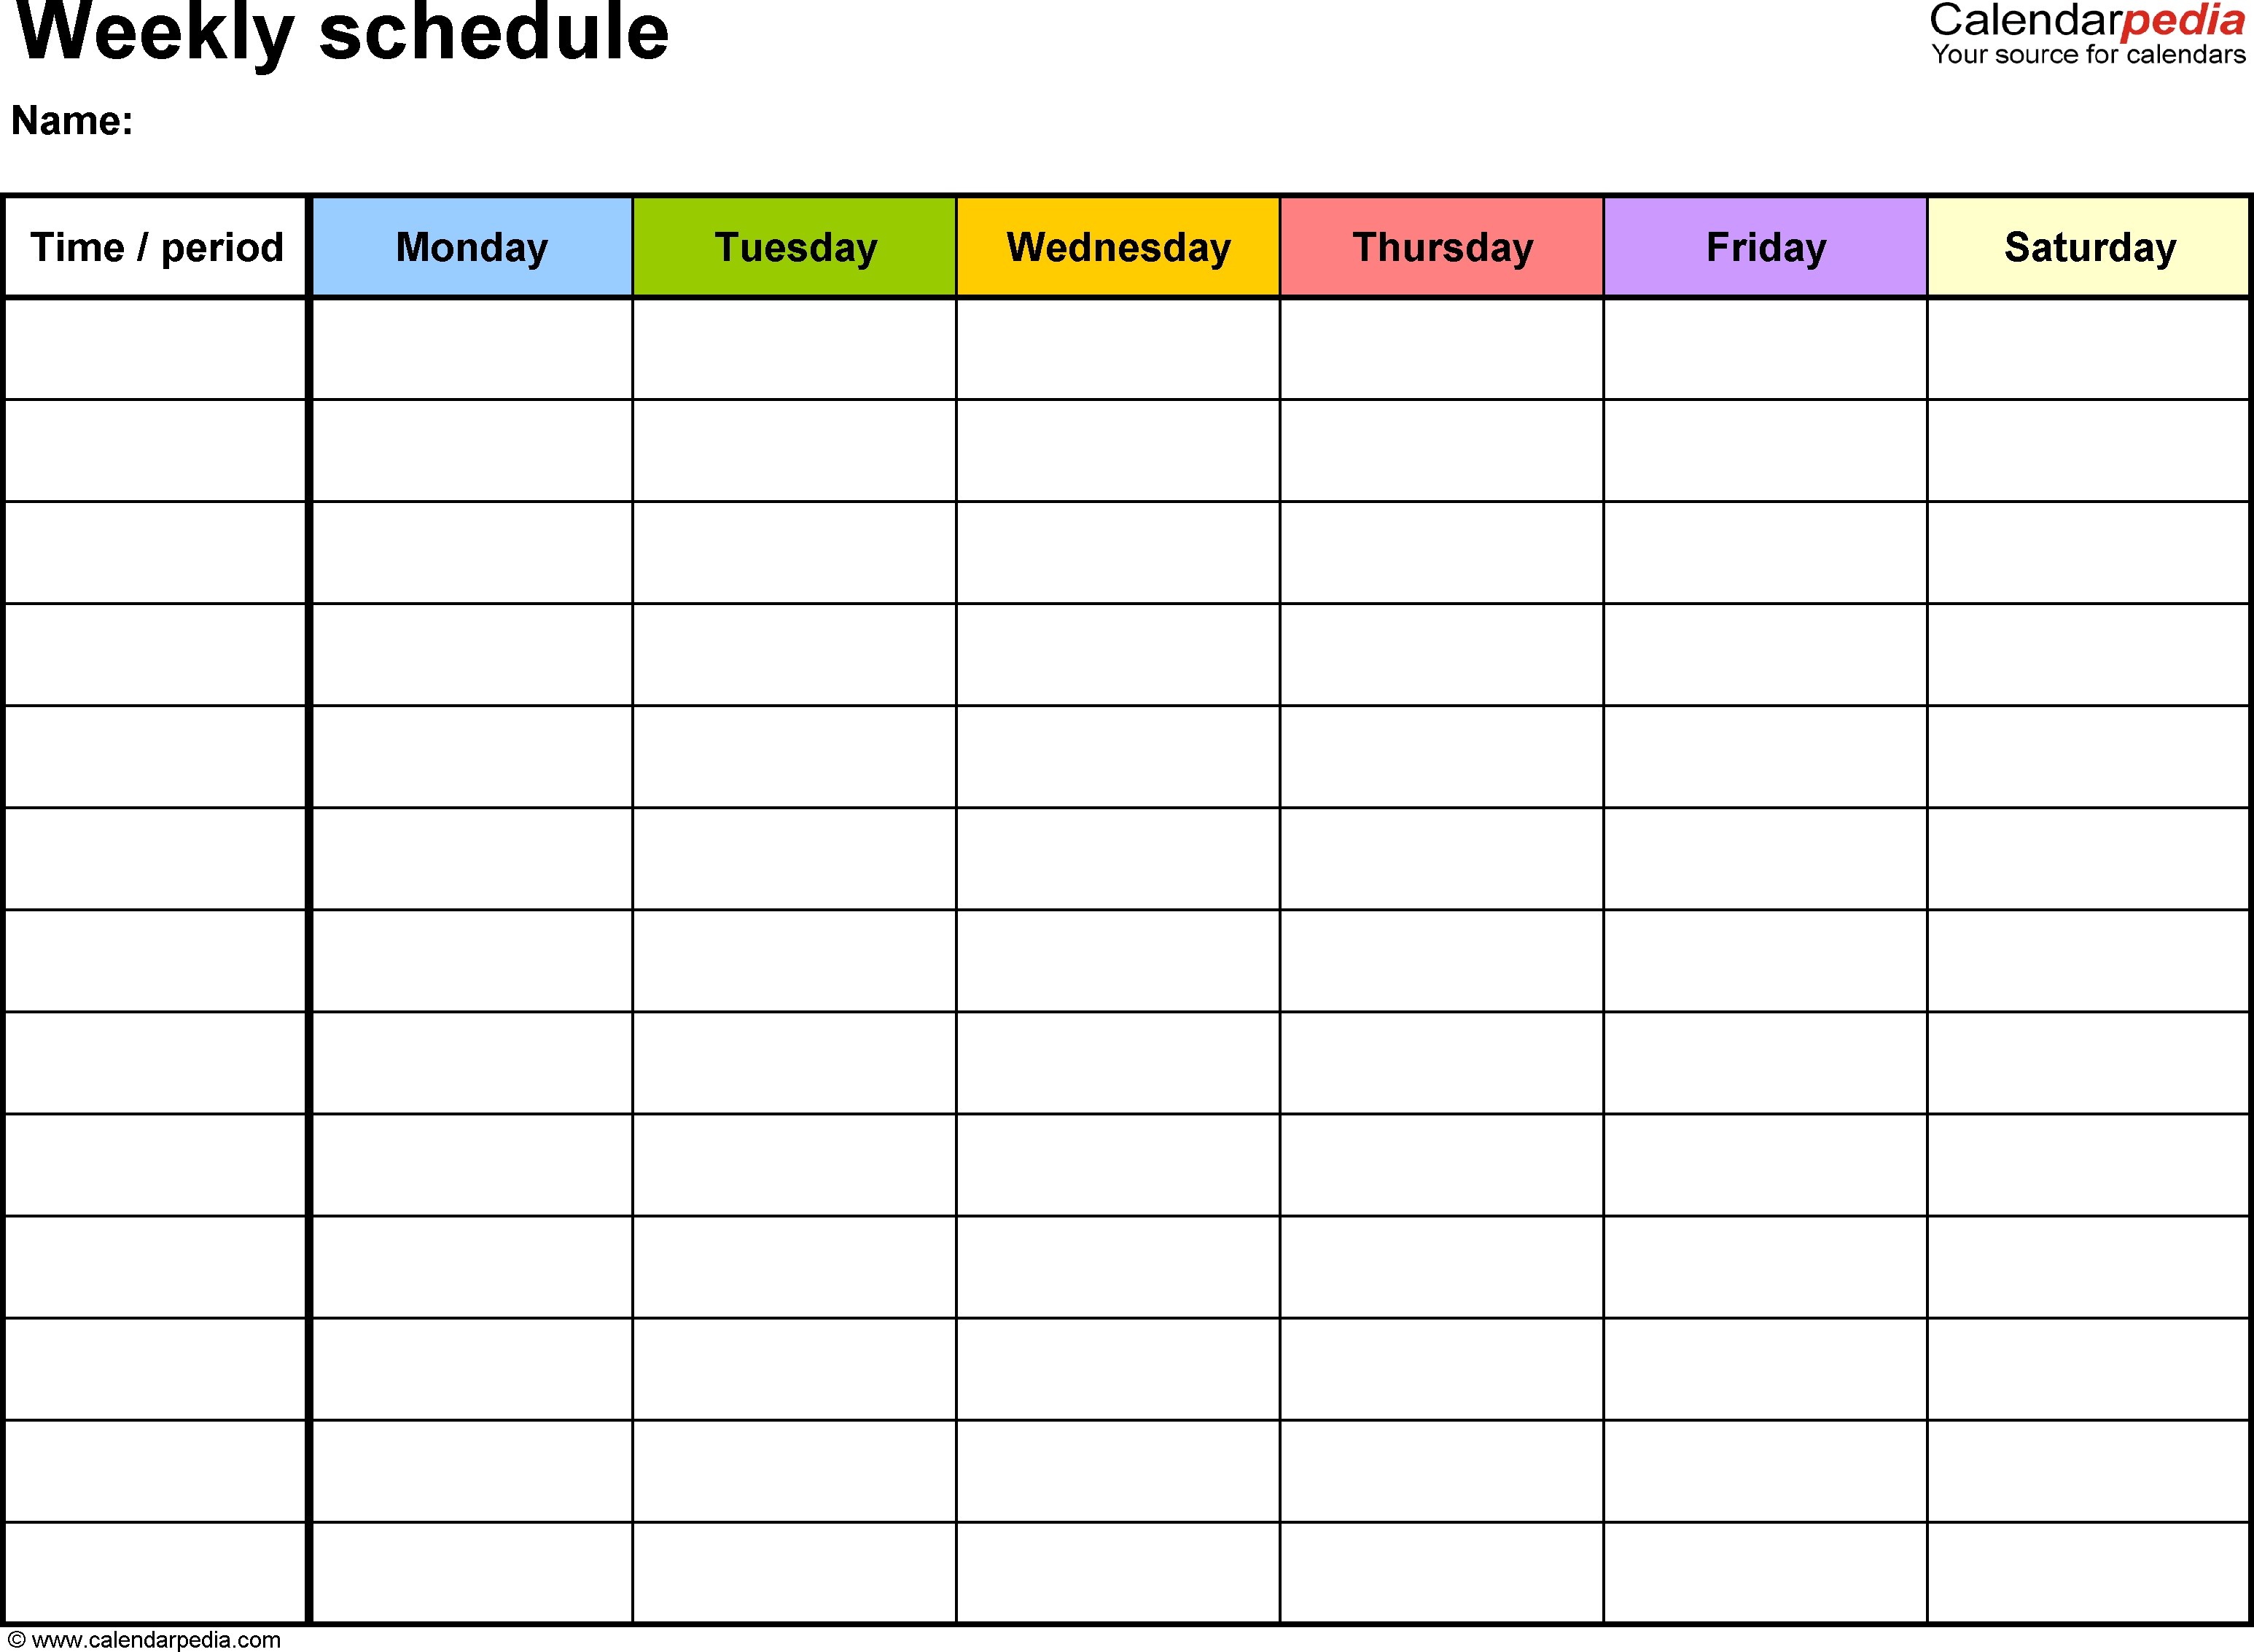 Free Weekly Schedule Templates For Word - 18 Templates intended for Printable Weekly Schedule Monday Through Friday